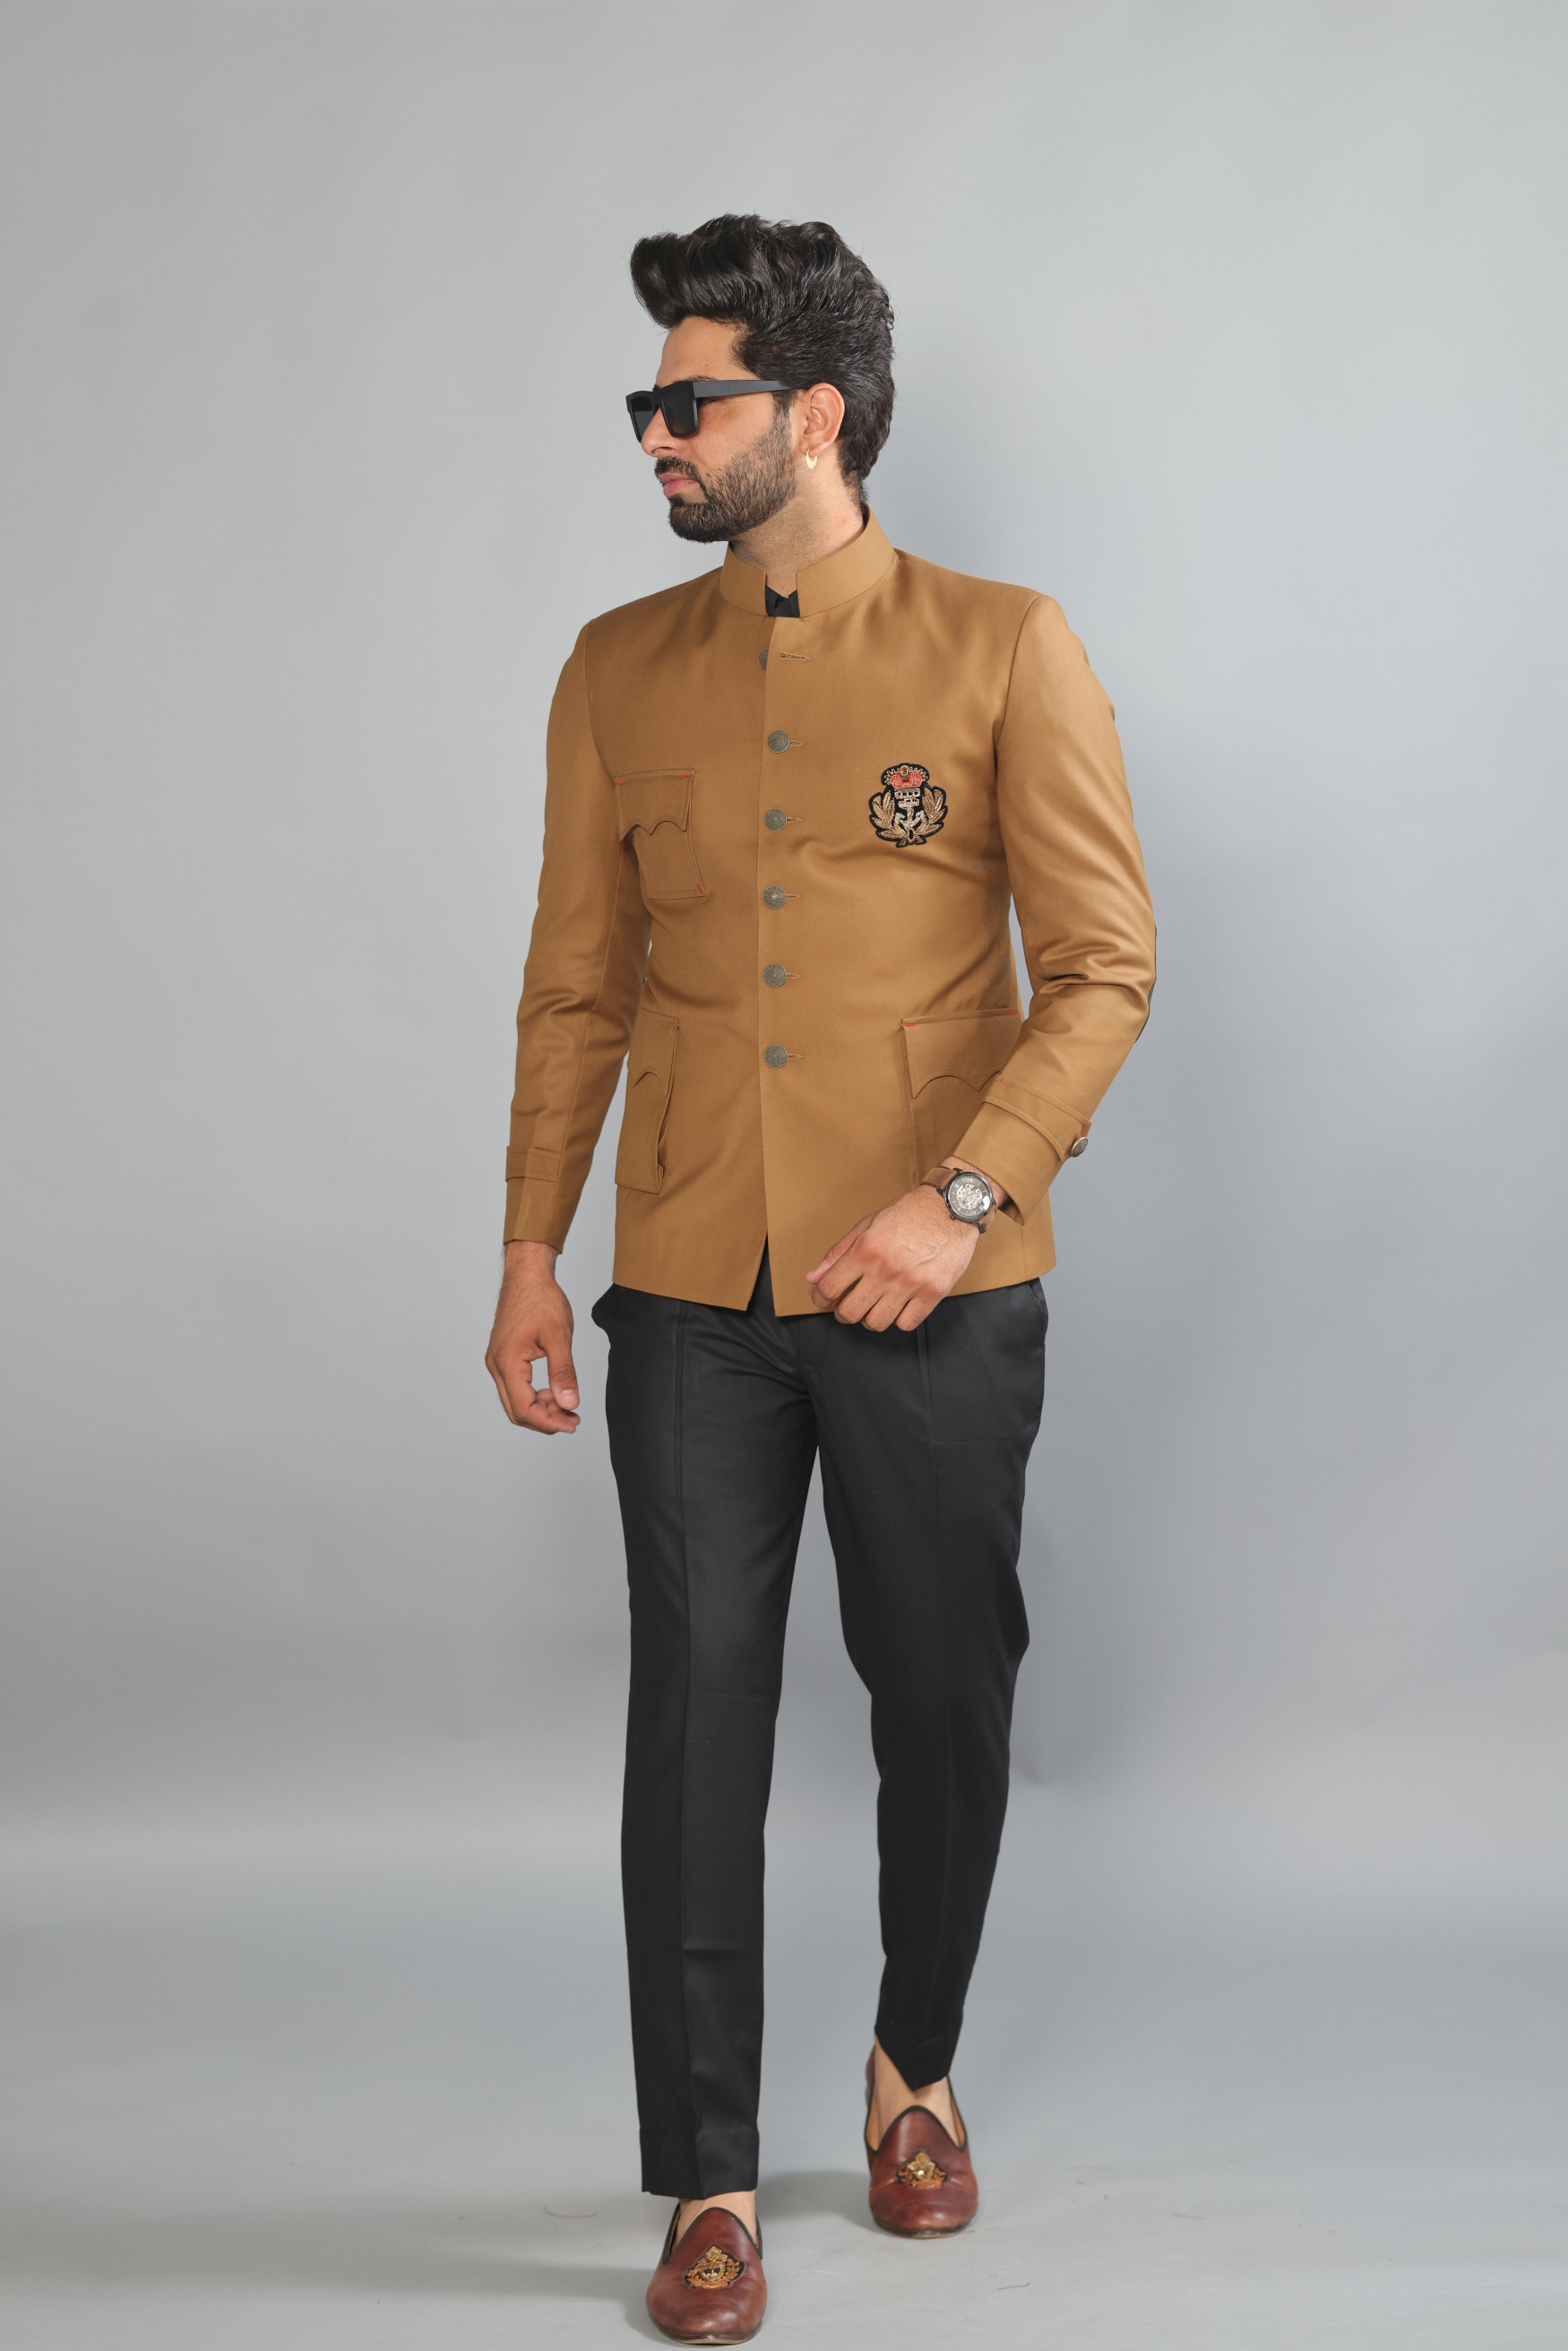 Stunning Camel Brown Bandhgala With Zardozi Embroidered Patch | Black Trouser | Free Personalisation Handmade | Perfect for Wedding and Party Wear |